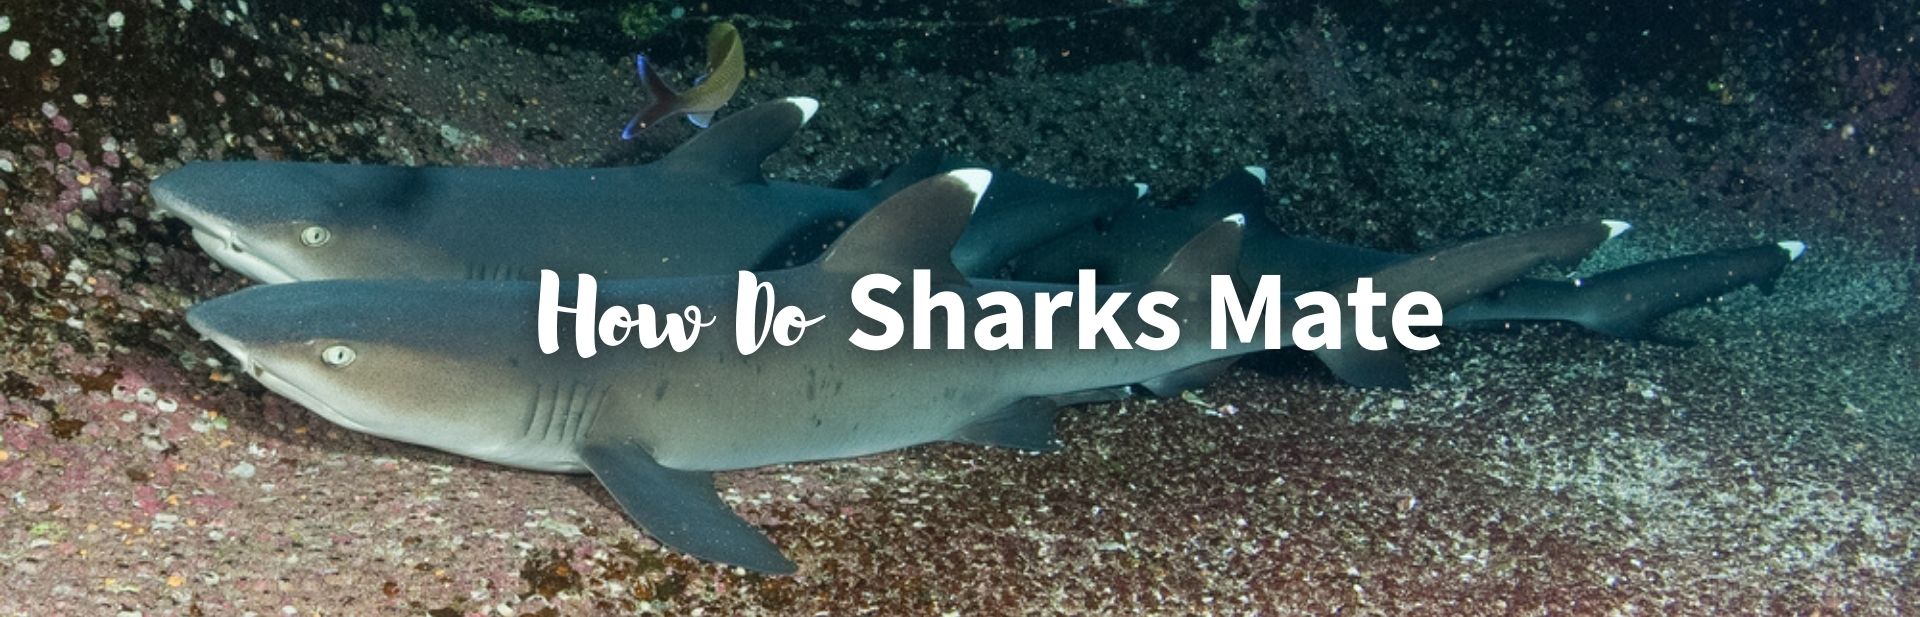 How Do Sharks Mate? It Might Surprise You